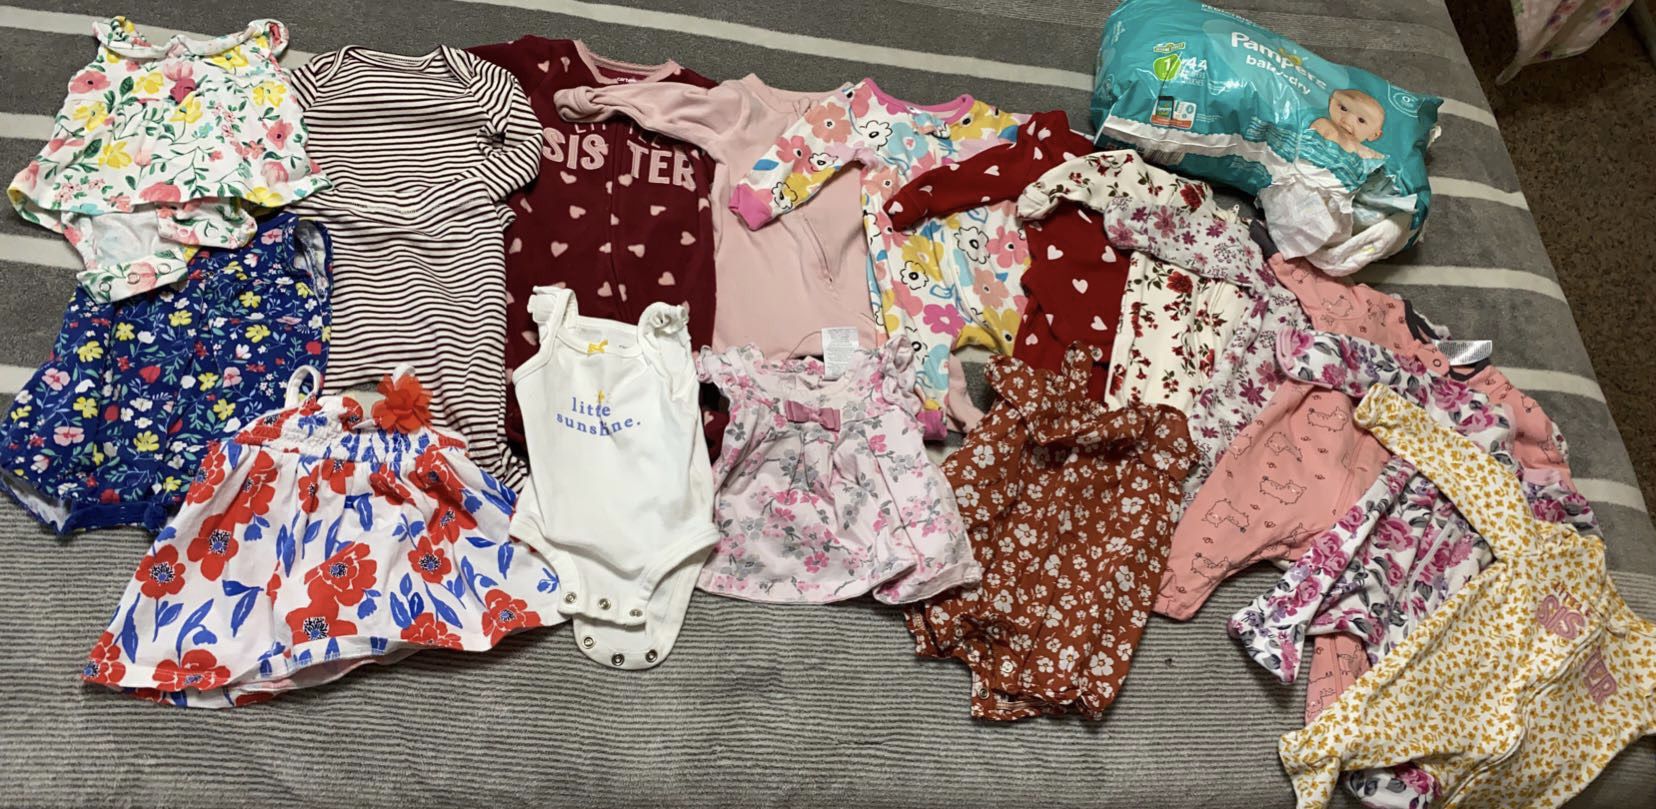 Lots Of Newborn New & Gently Used Clothes . $50 Or Best Offer 